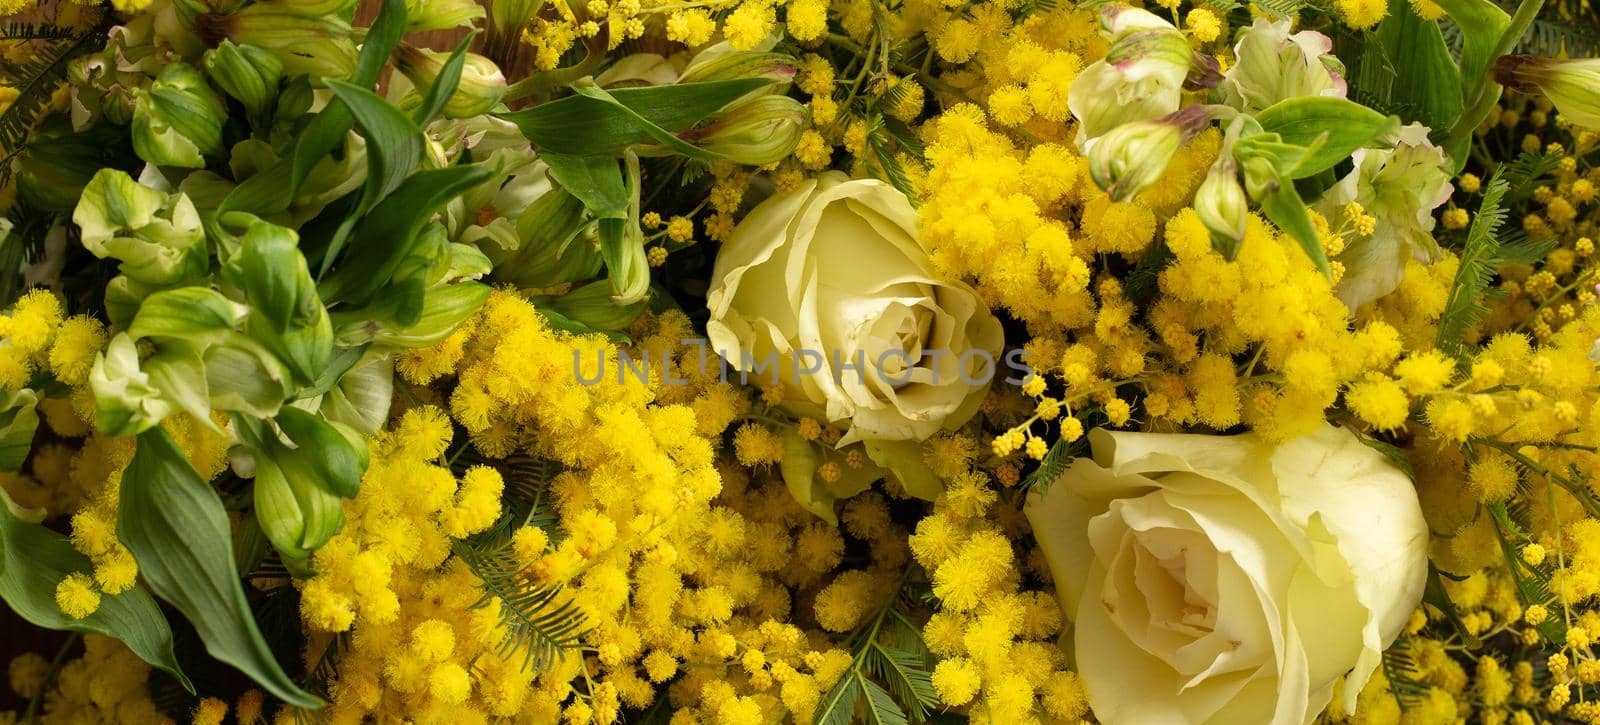 Flowerer background in yellow colour by NelliPolk